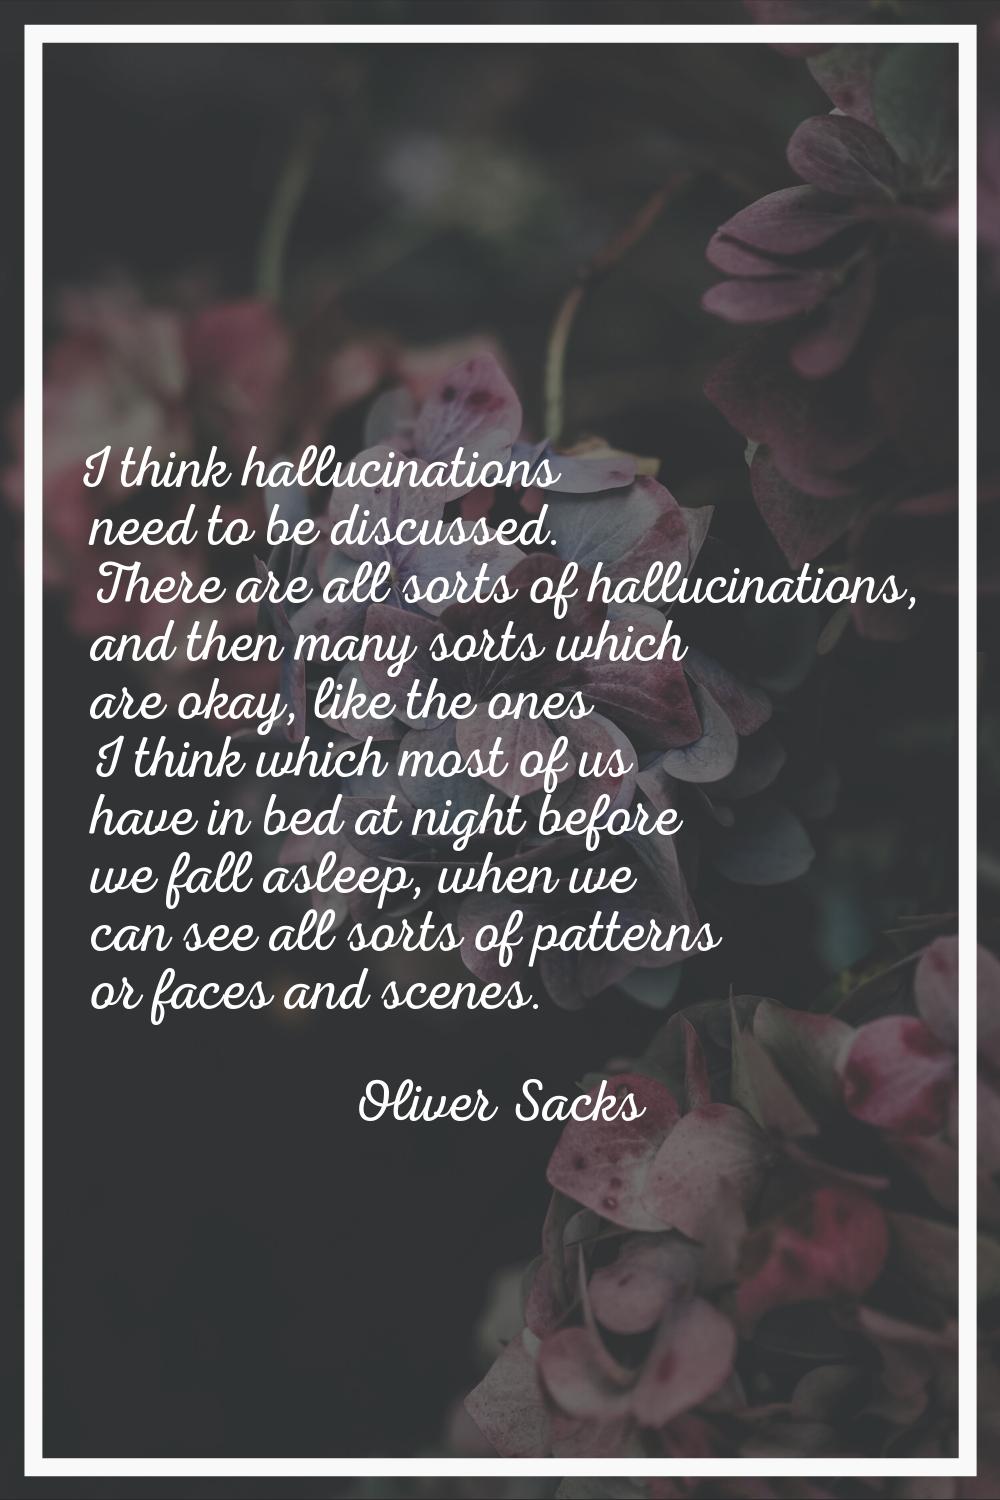 I think hallucinations need to be discussed. There are all sorts of hallucinations, and then many s